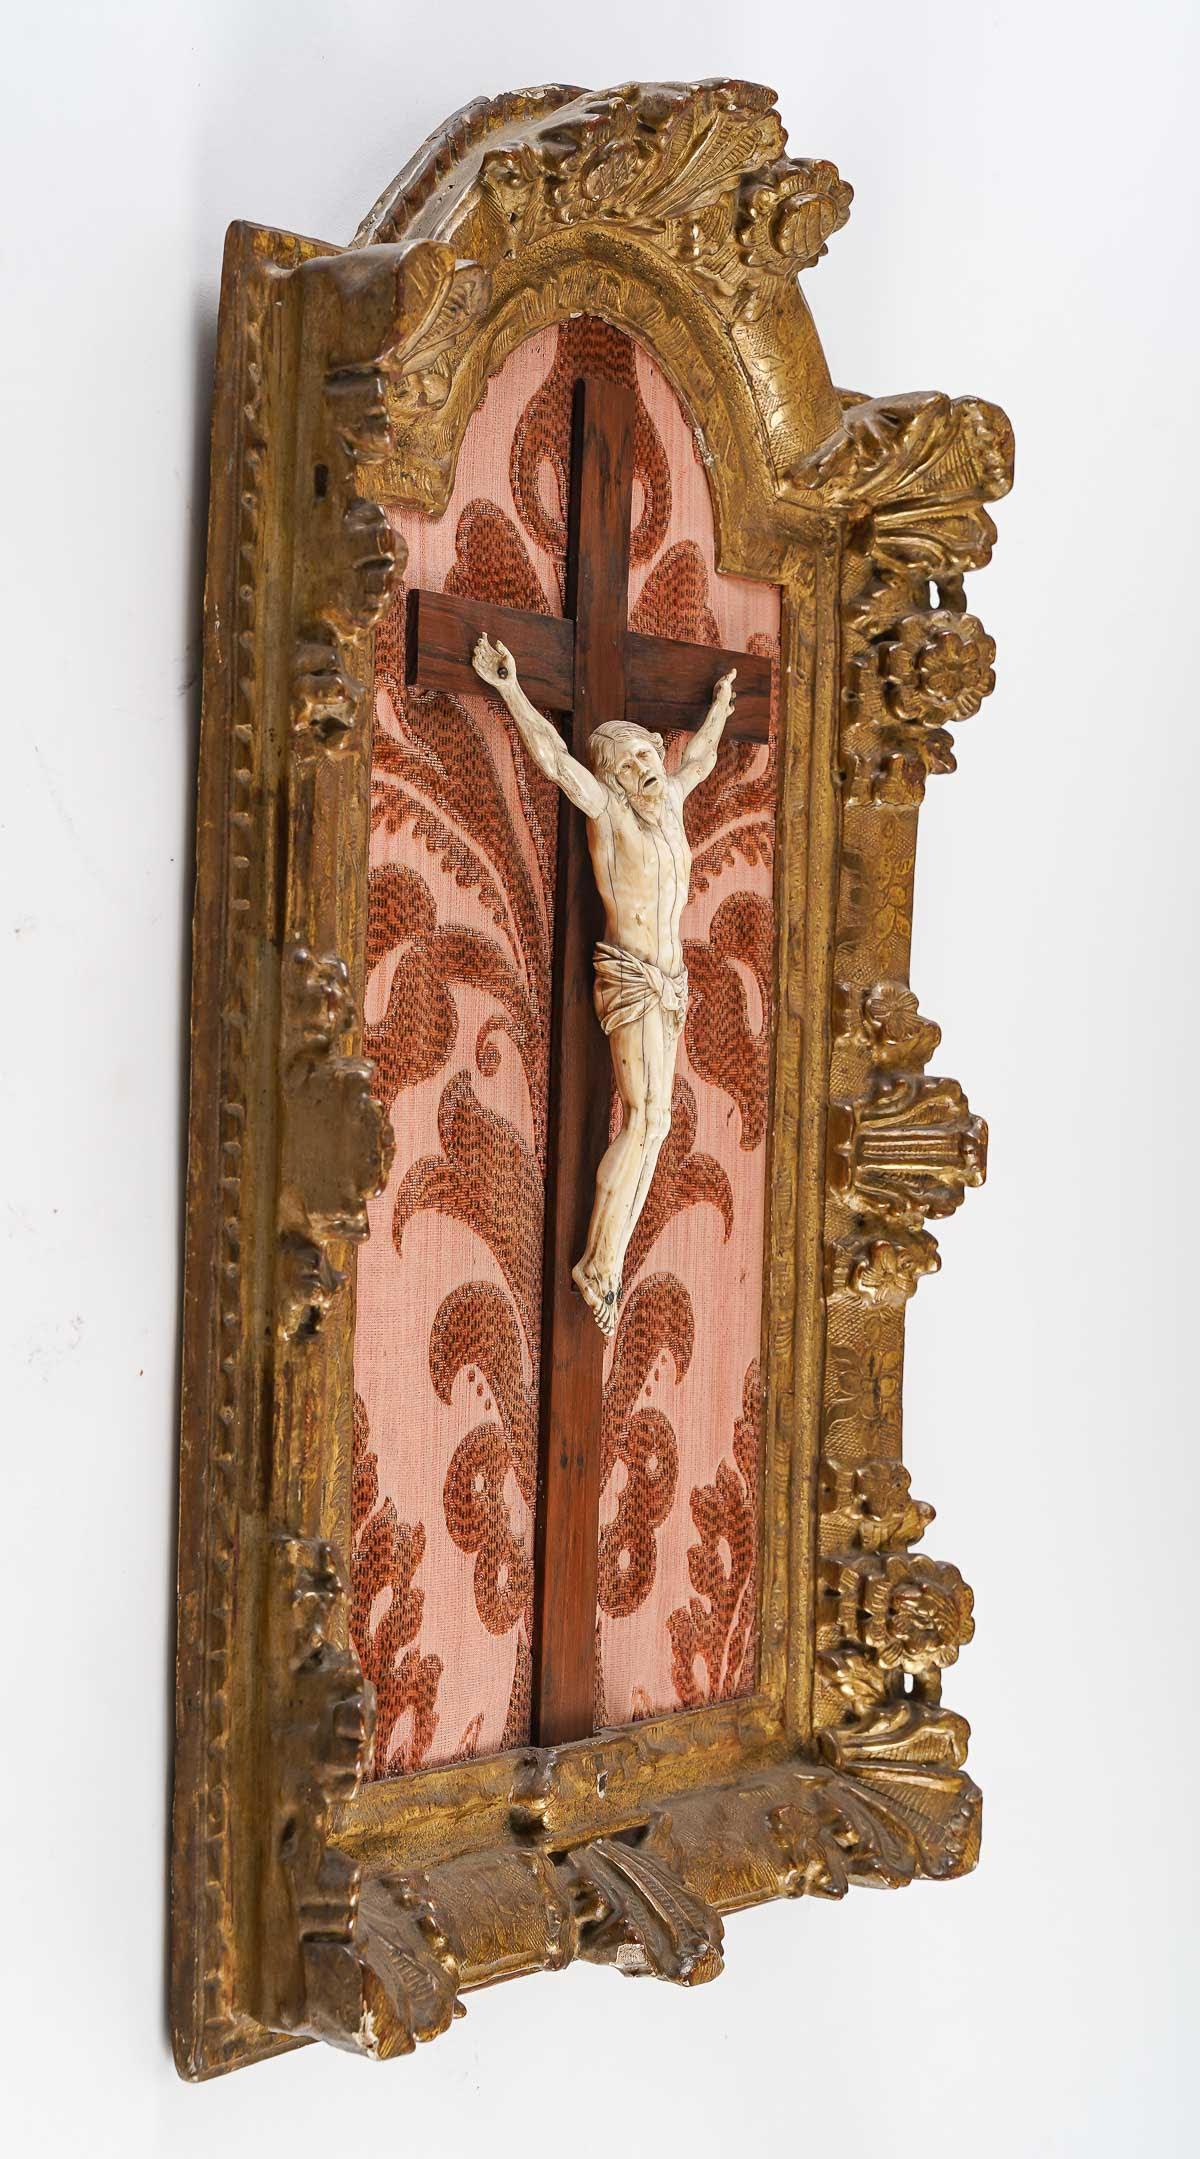 Christ , 18th century.

Crucifix, Christ, beautiful carved and gilded wood frame, 18th century.

Dimensions: H: 61cm, W: 39cm, D: 7cm.